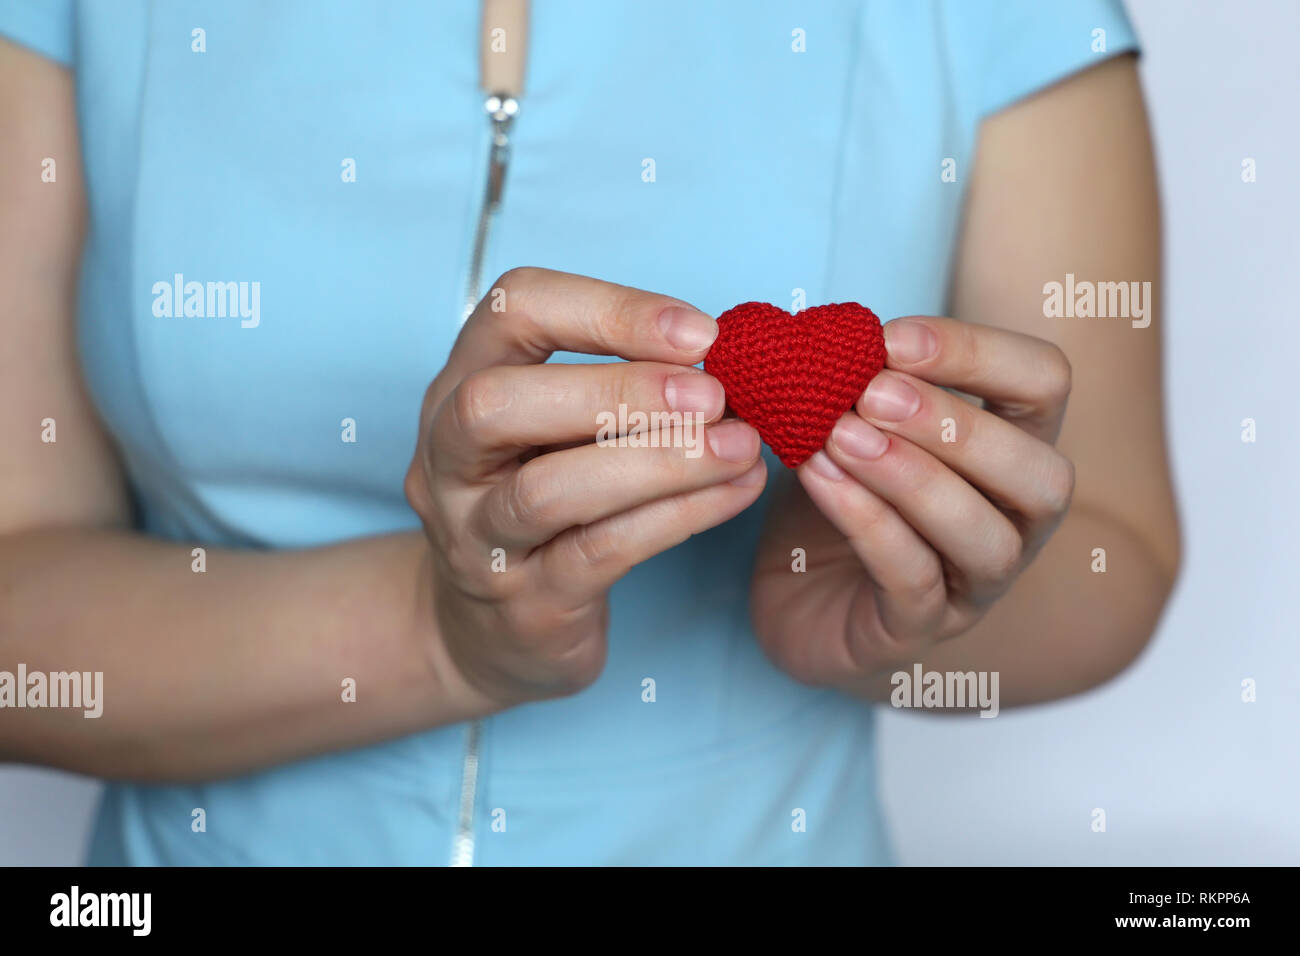 Valentines heart, declaration of love, woman holding red knitted heart on her chest. Concept of romance, charity, saving lives, health care Stock Photo